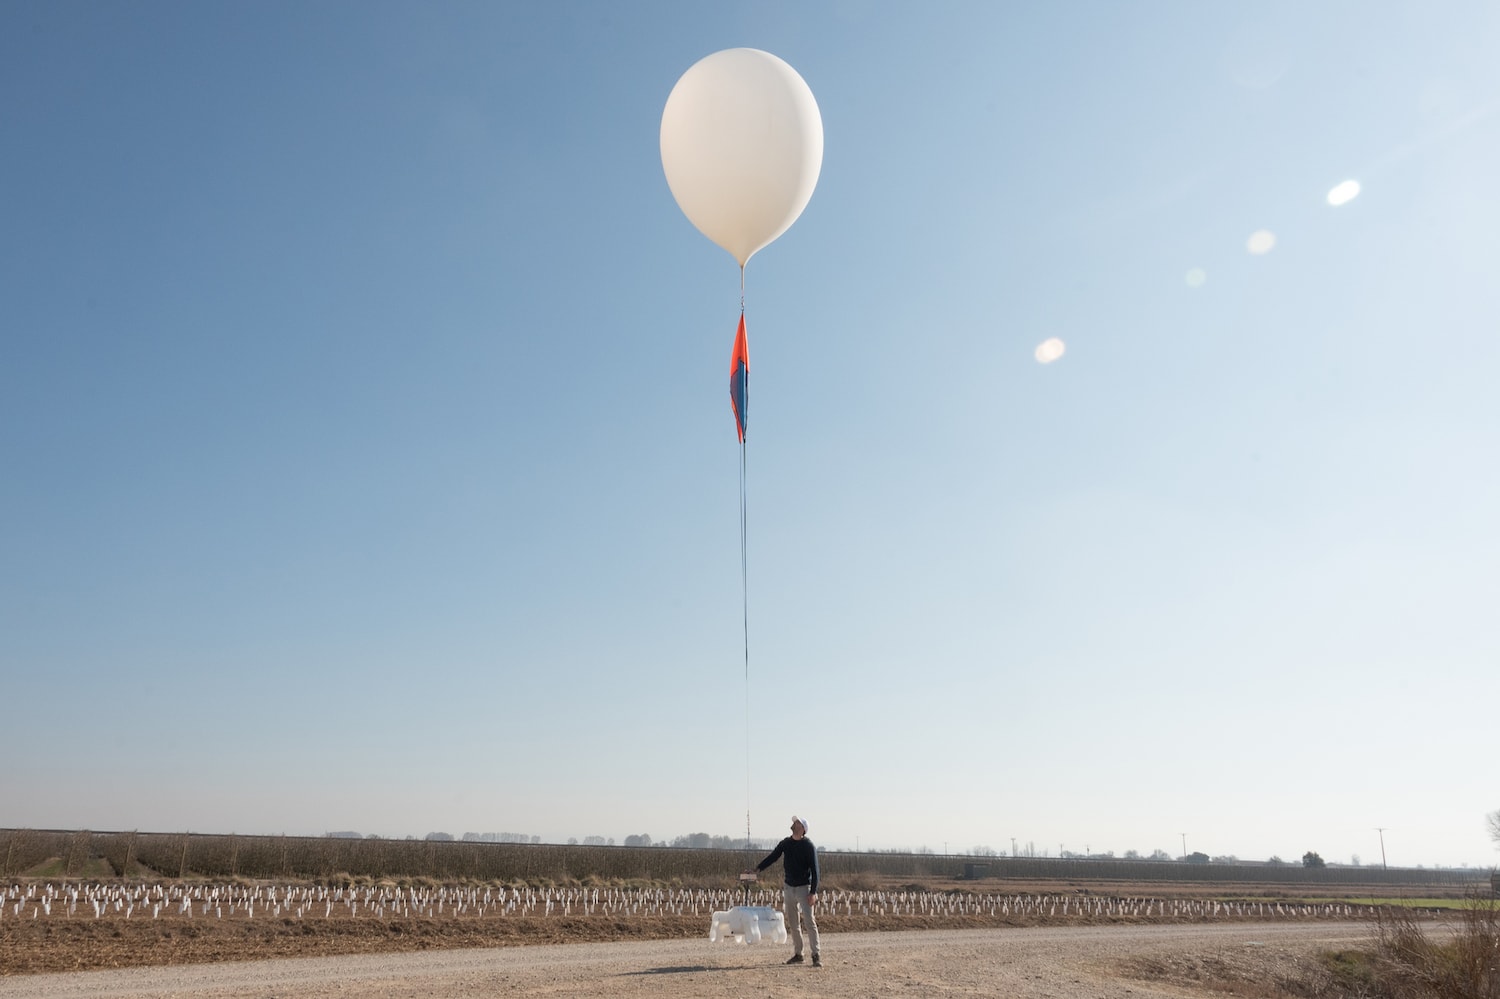 Swifty Earth imaging robot and balloon